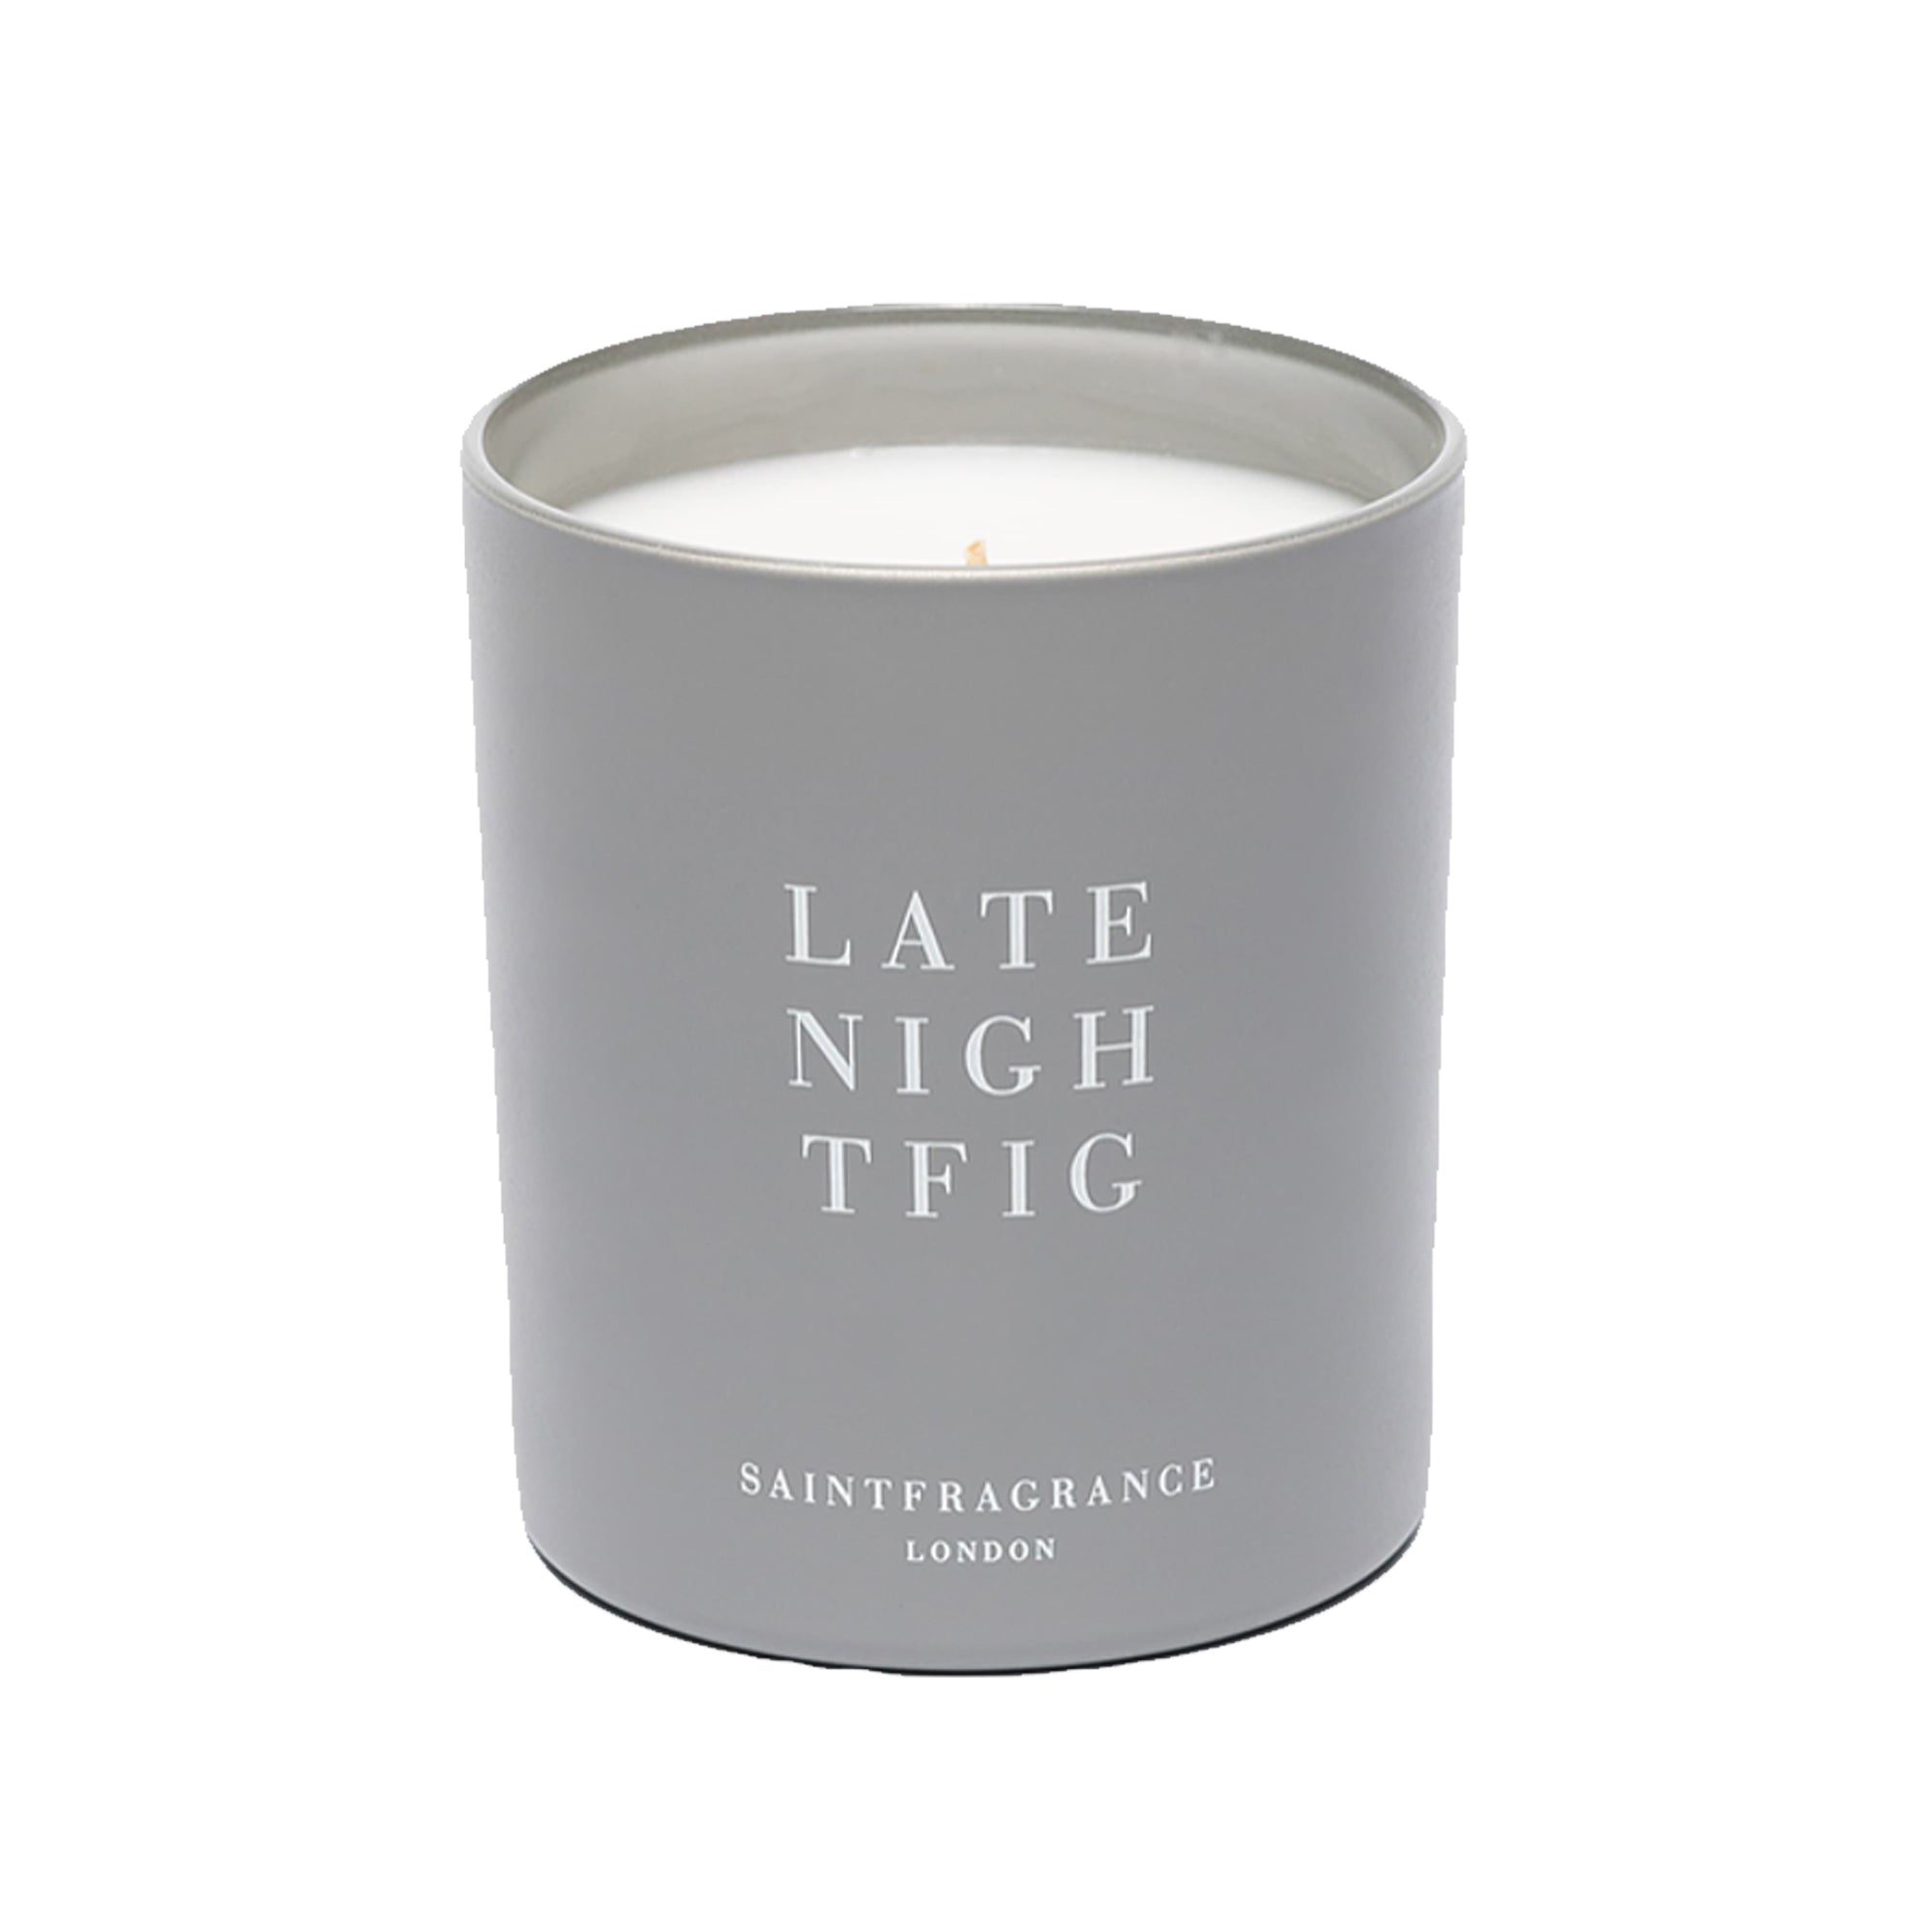 Late Night Fig 200g Scented Candle by Saint Fragrance